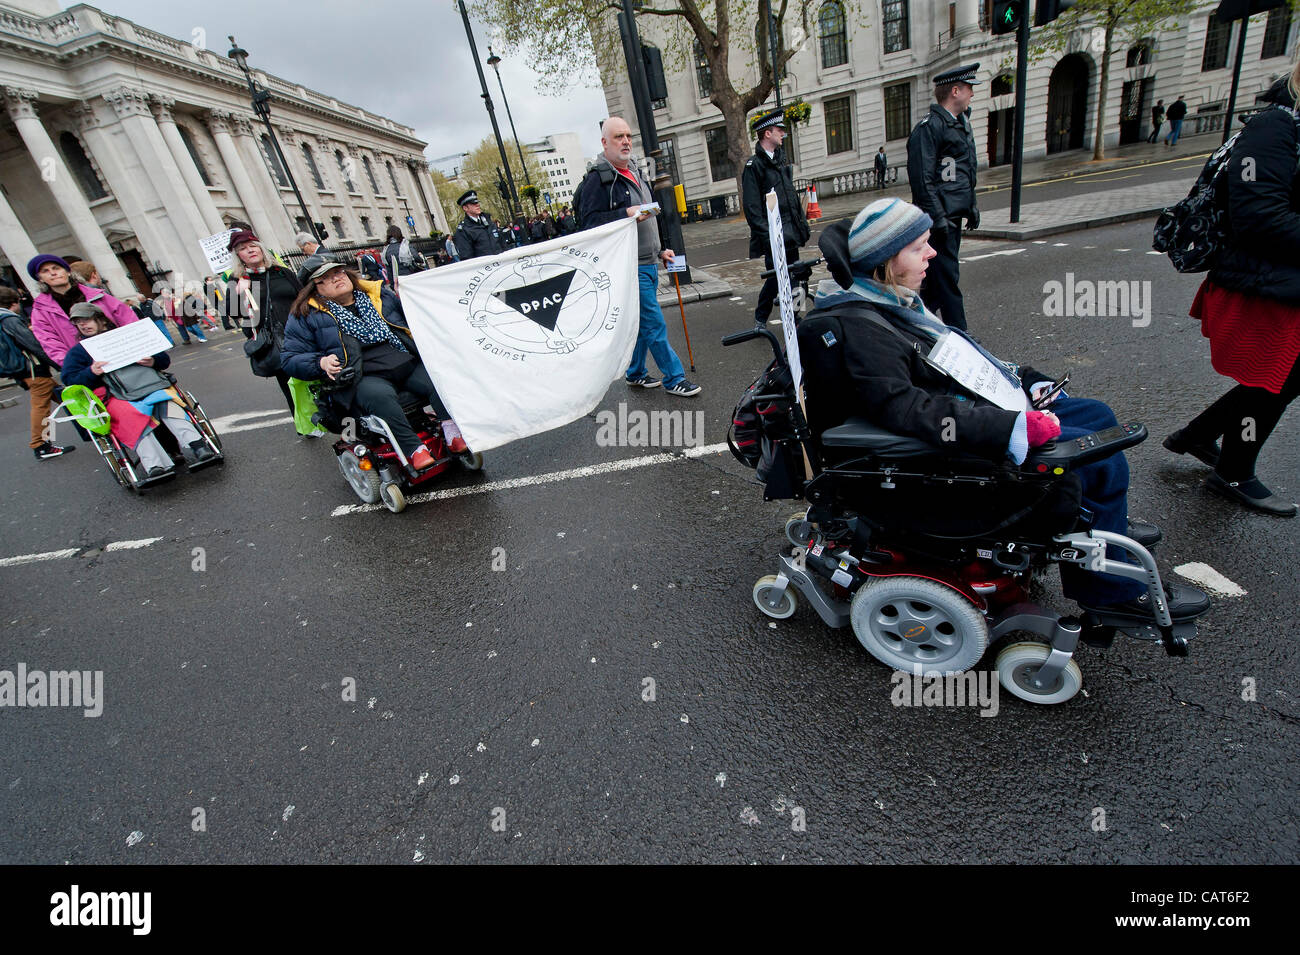 Members of DPAC (Disabled people against cuts) and UKUncut march from Leicester Square to Trafalgar Square where they block the junction with the Strand. They are protesting about the cuts to Remploy Factories and the Welfare Reform Bill in general. London UK, 18 April 2012. Stock Photo